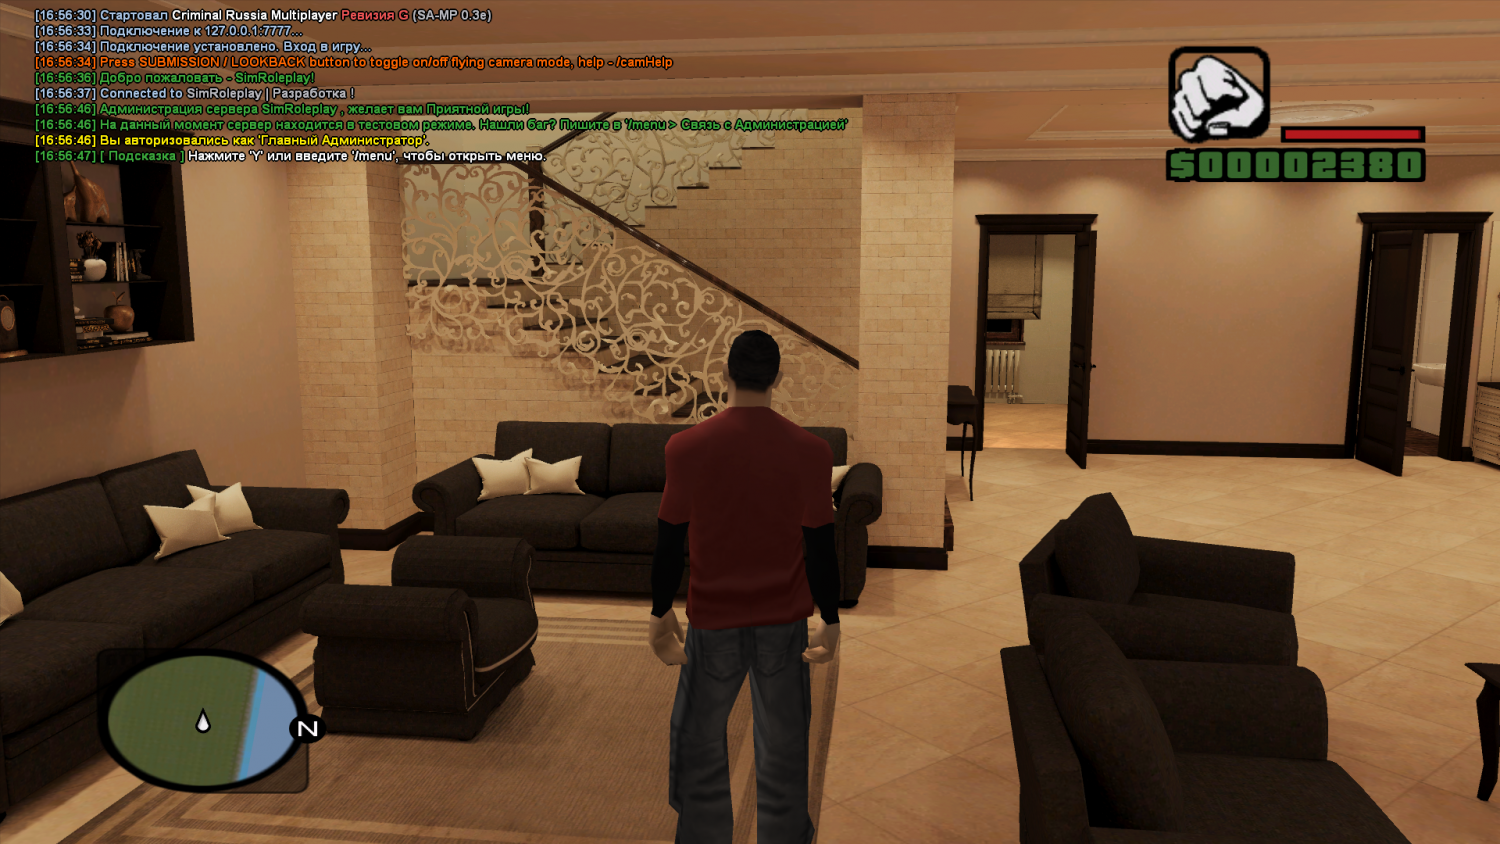 The Interior Of A Private 2-Storey House For GTA Games 3D Model In.